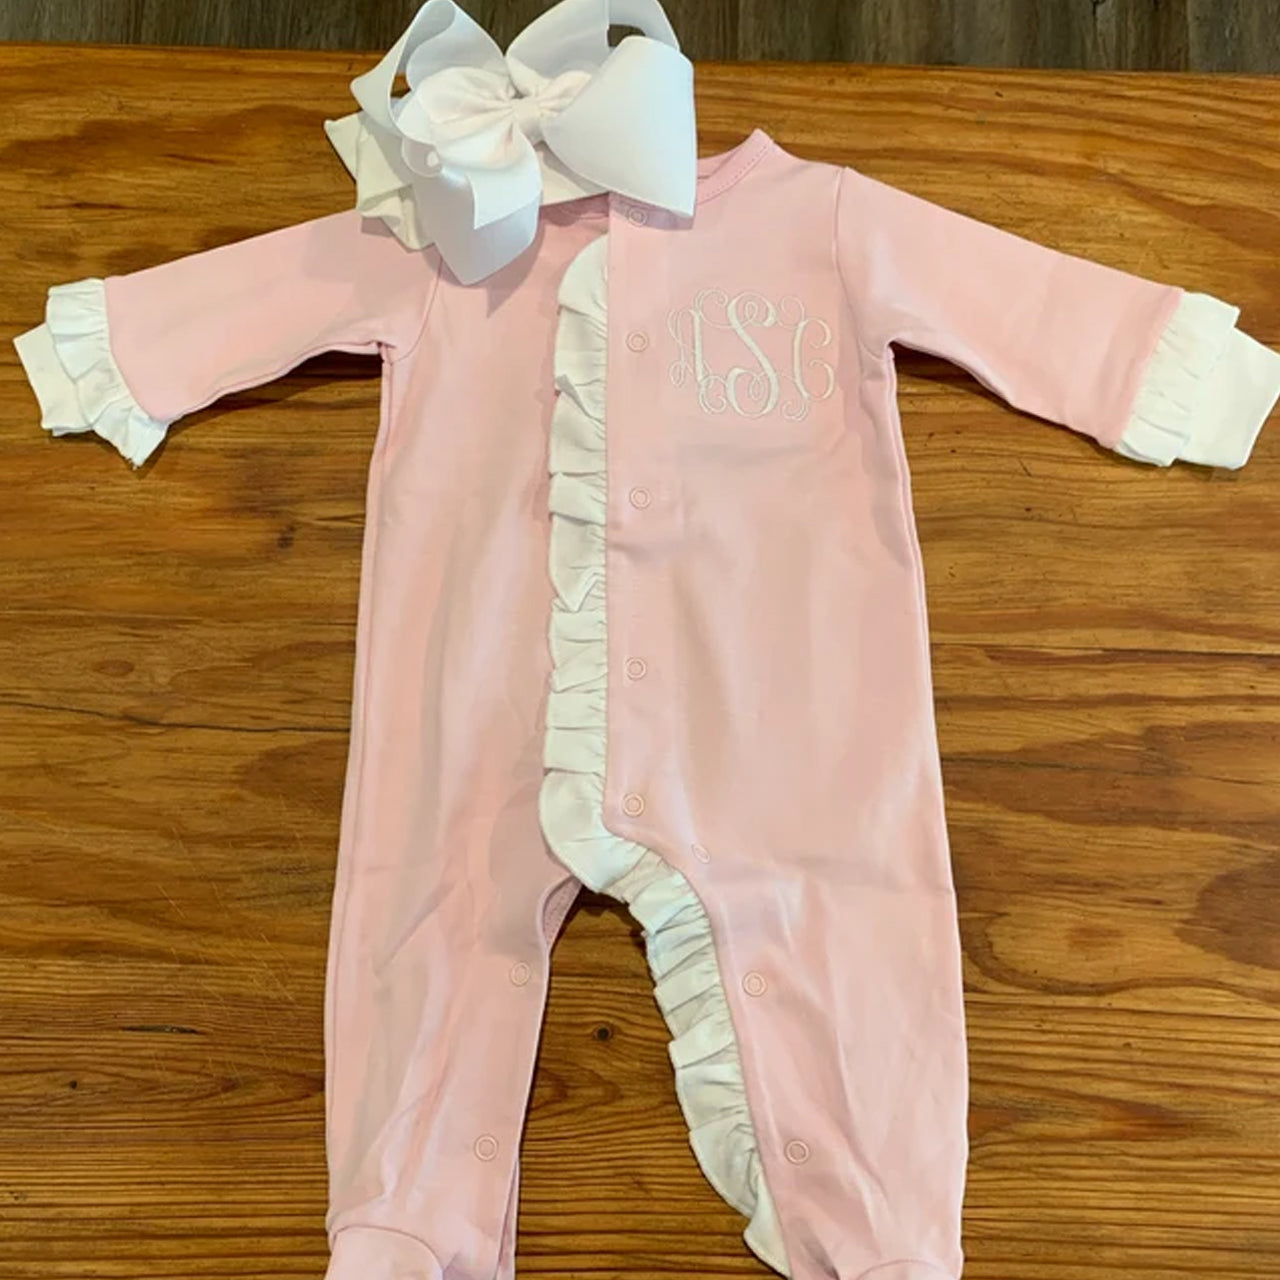 Personalized Monogrammed Baby Girl Coming Home Outfit Pink 3 Piece Sets